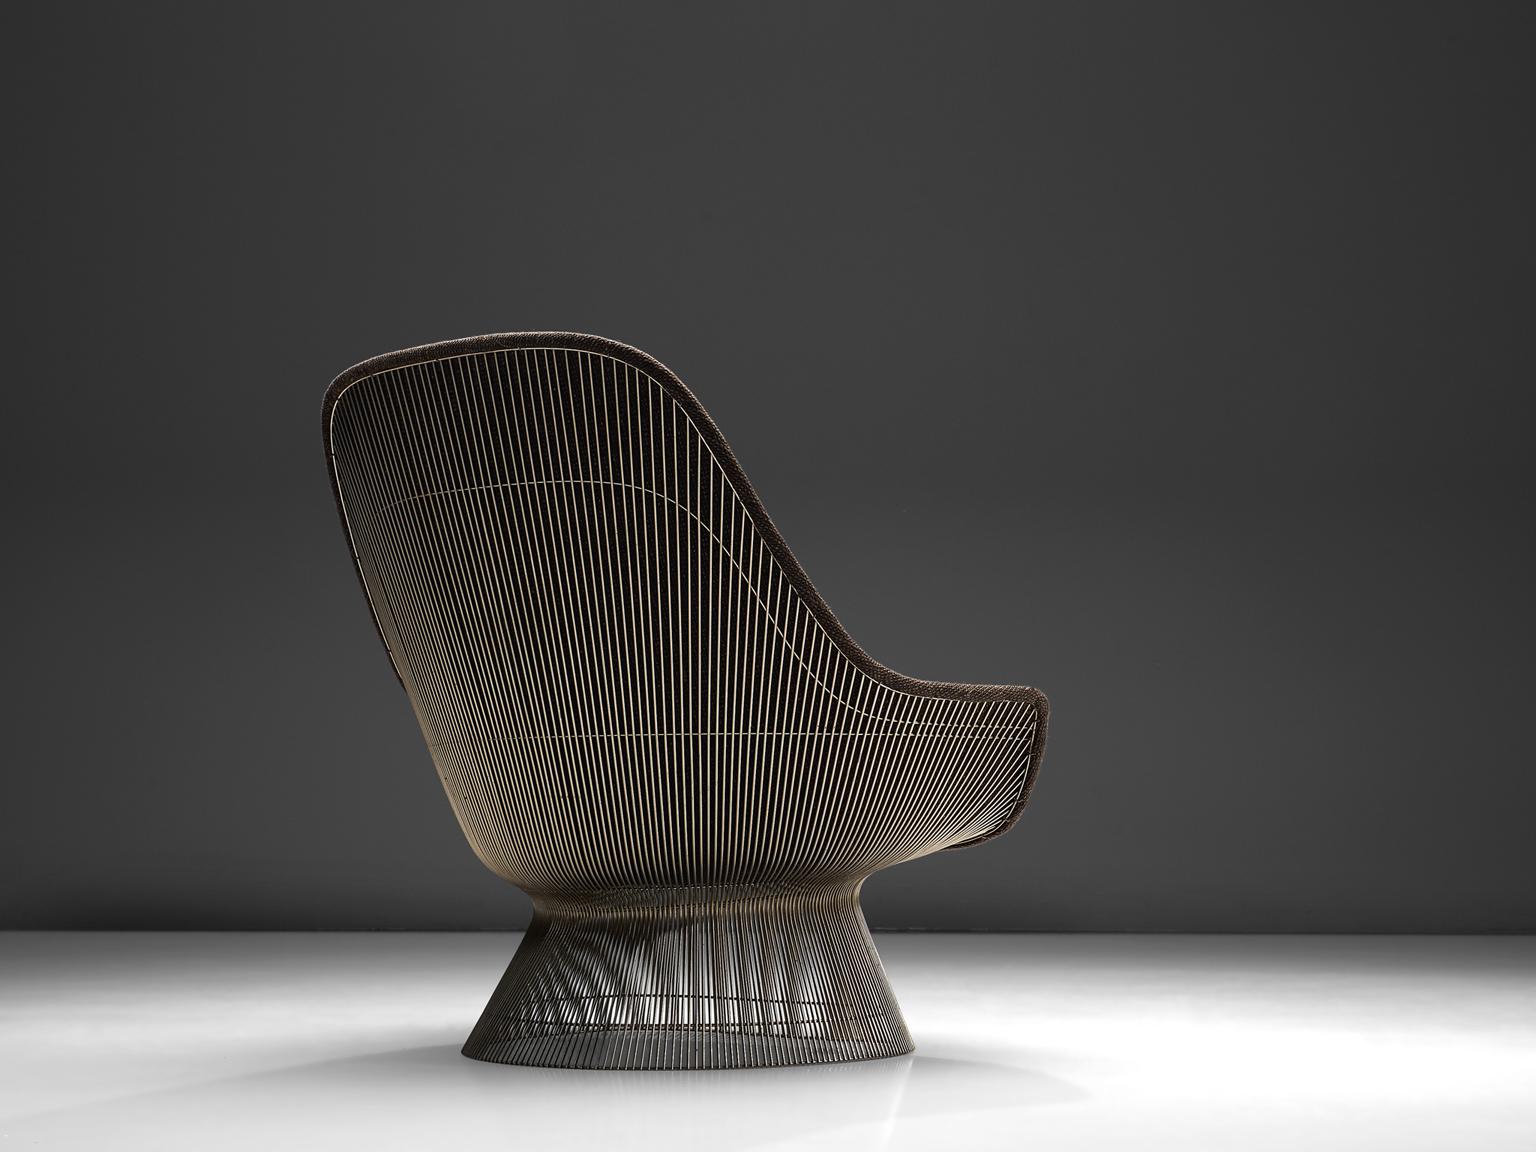 Warren Platner for Knoll, easy chair 'model 1705' and ottoman, steel and brown fabric, United States, design 1966, production later.

This iconic easy chair by Warren Platner is created by welding curved steel rods to circular and semi-circular